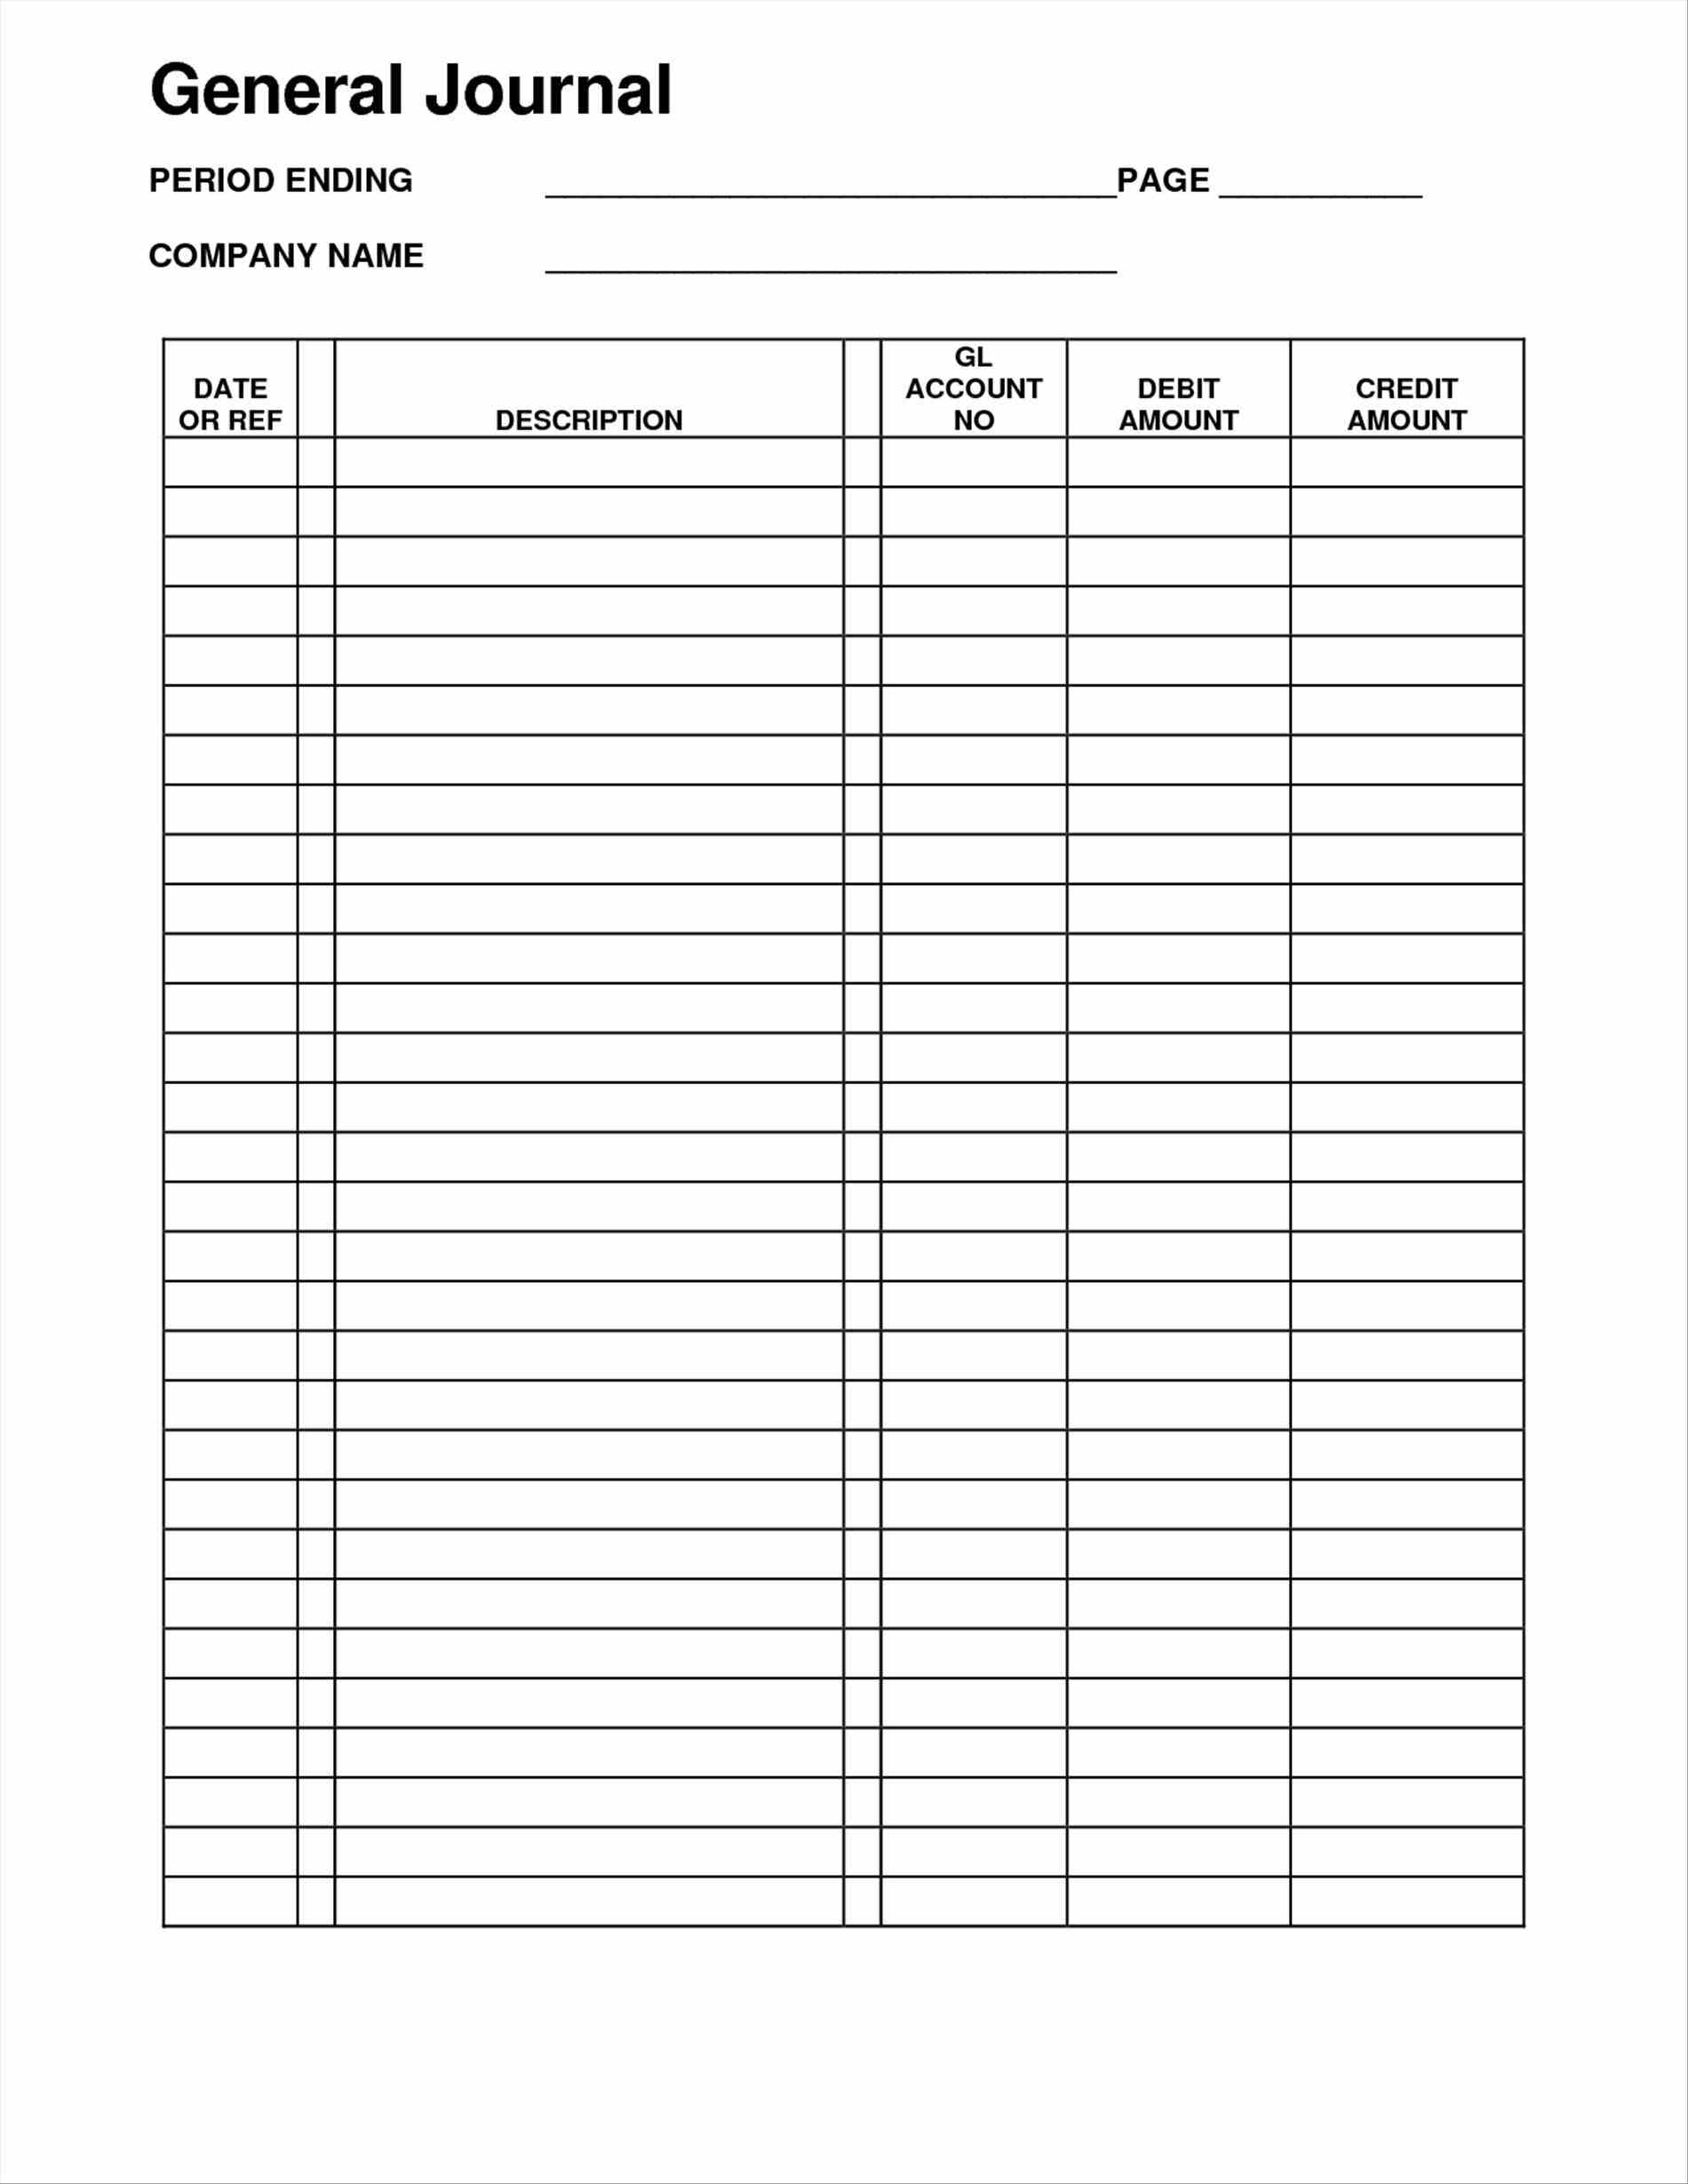 Accounting Forms Free Printable 5 - Down Town Ken More Throughout Free Business Accounting Forms